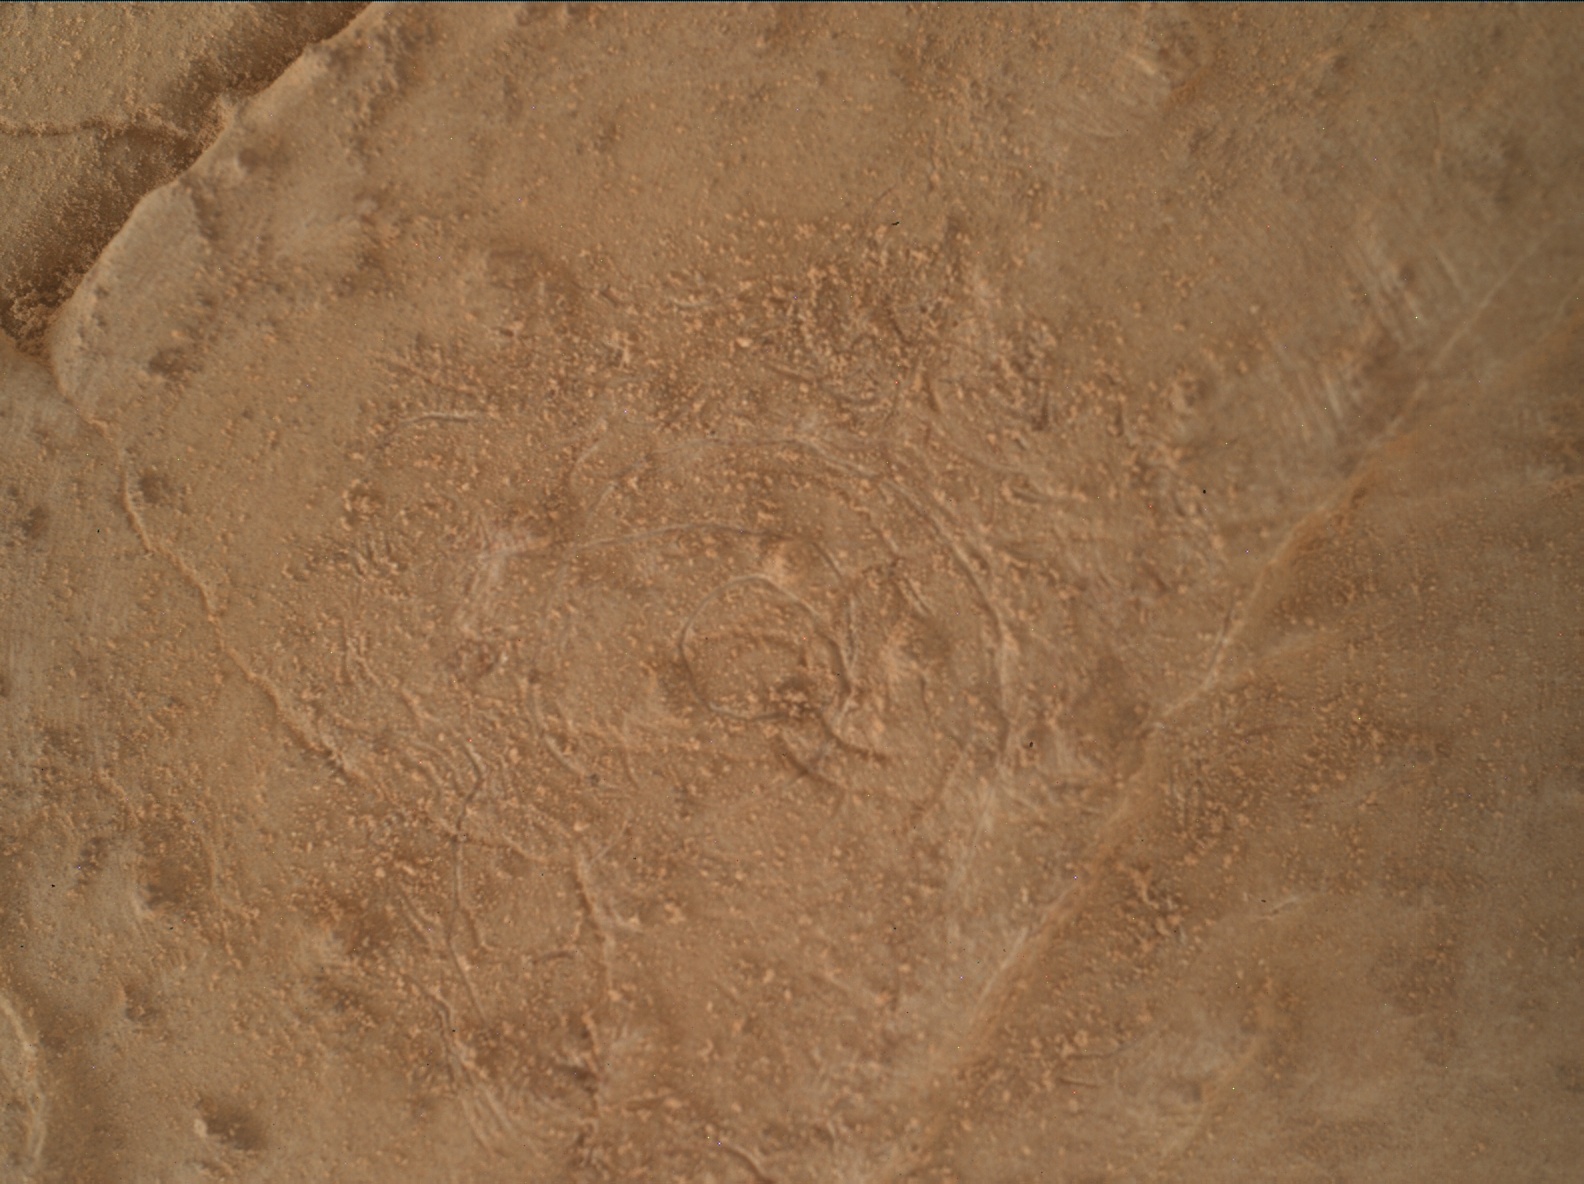 Nasa's Mars rover Curiosity acquired this image using its Mars Hand Lens Imager (MAHLI) on Sol 3054